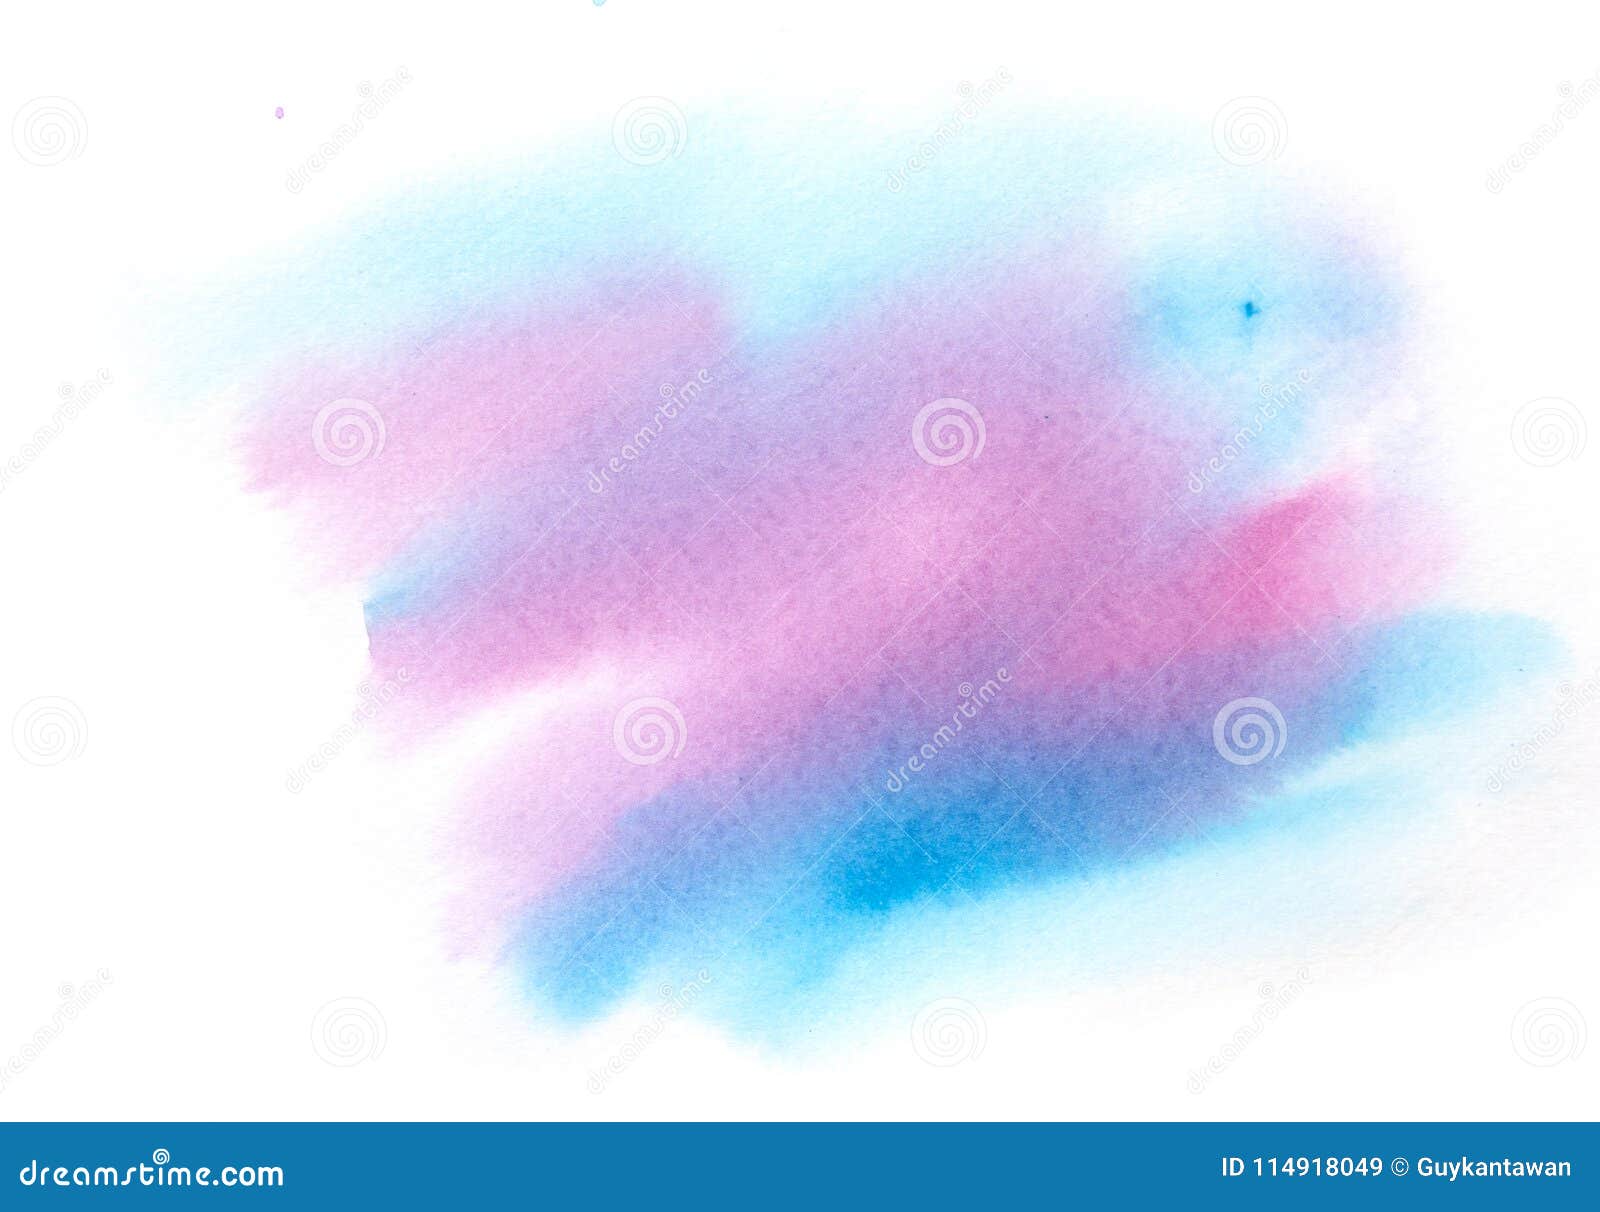 Blue And Pink Watercolor Background Stock Illustration - Illustration